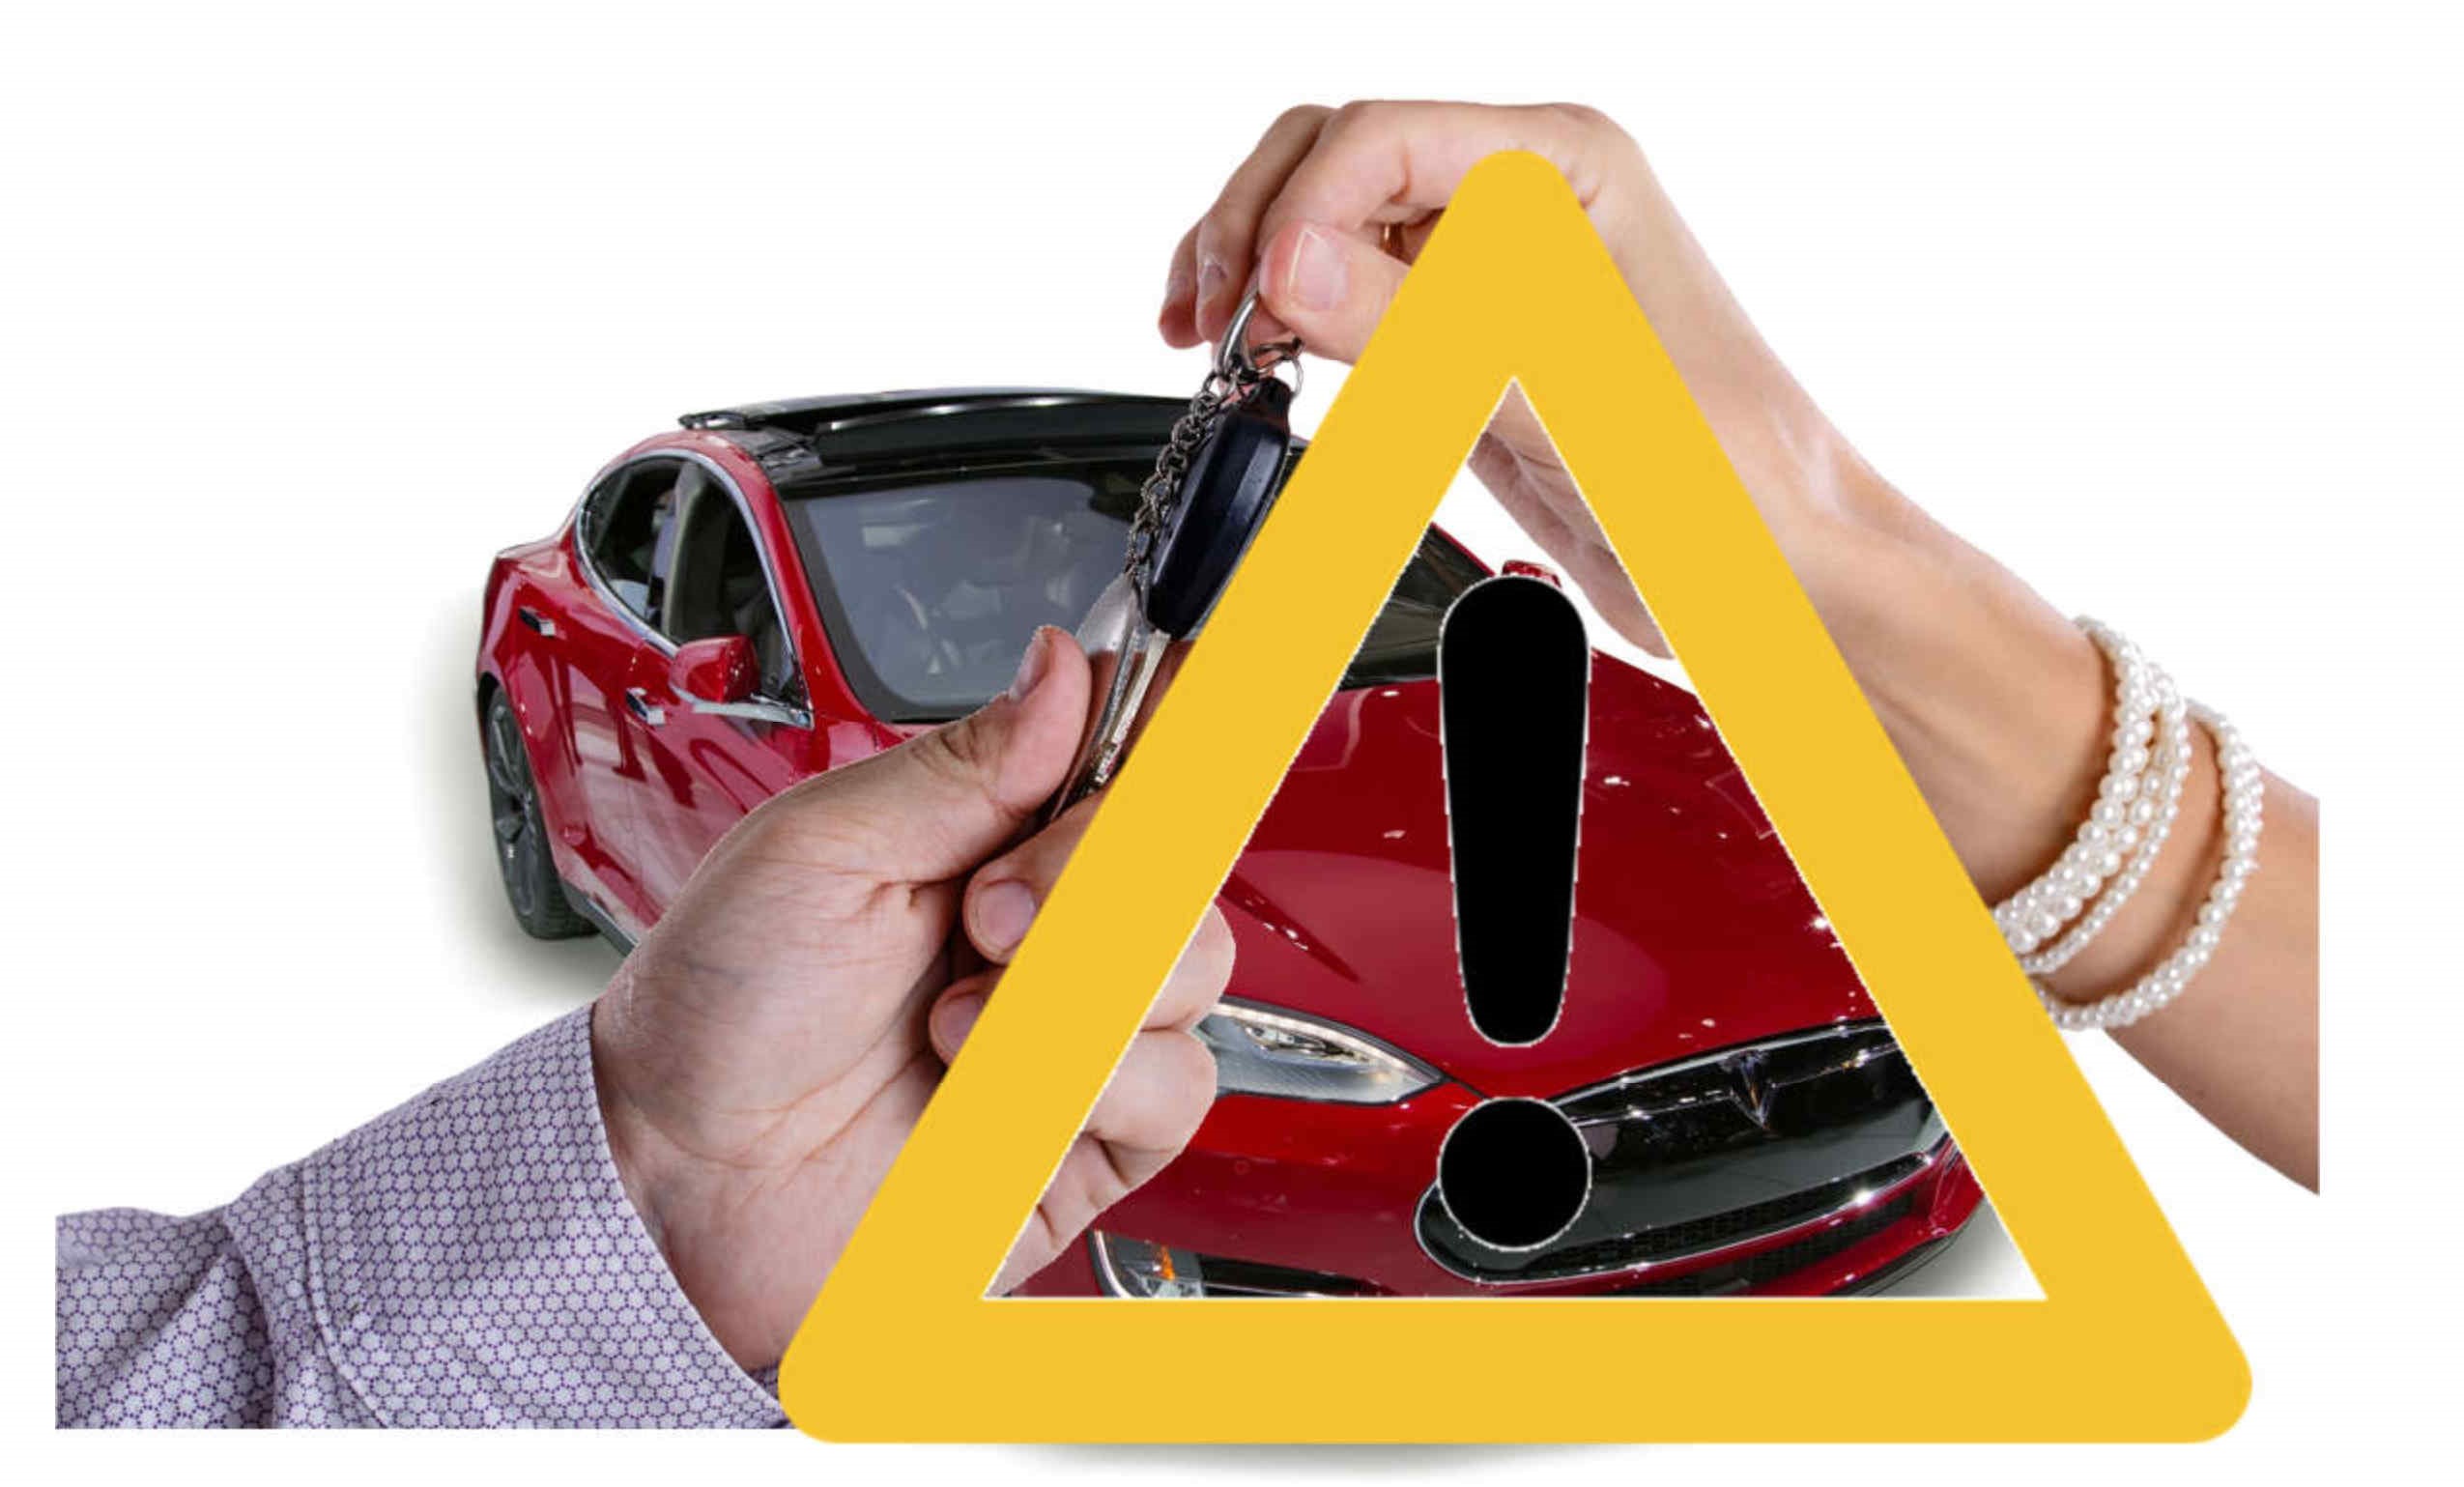 Risks of Renting High-Valued Vehicles to Progressive Insurance Policyholders